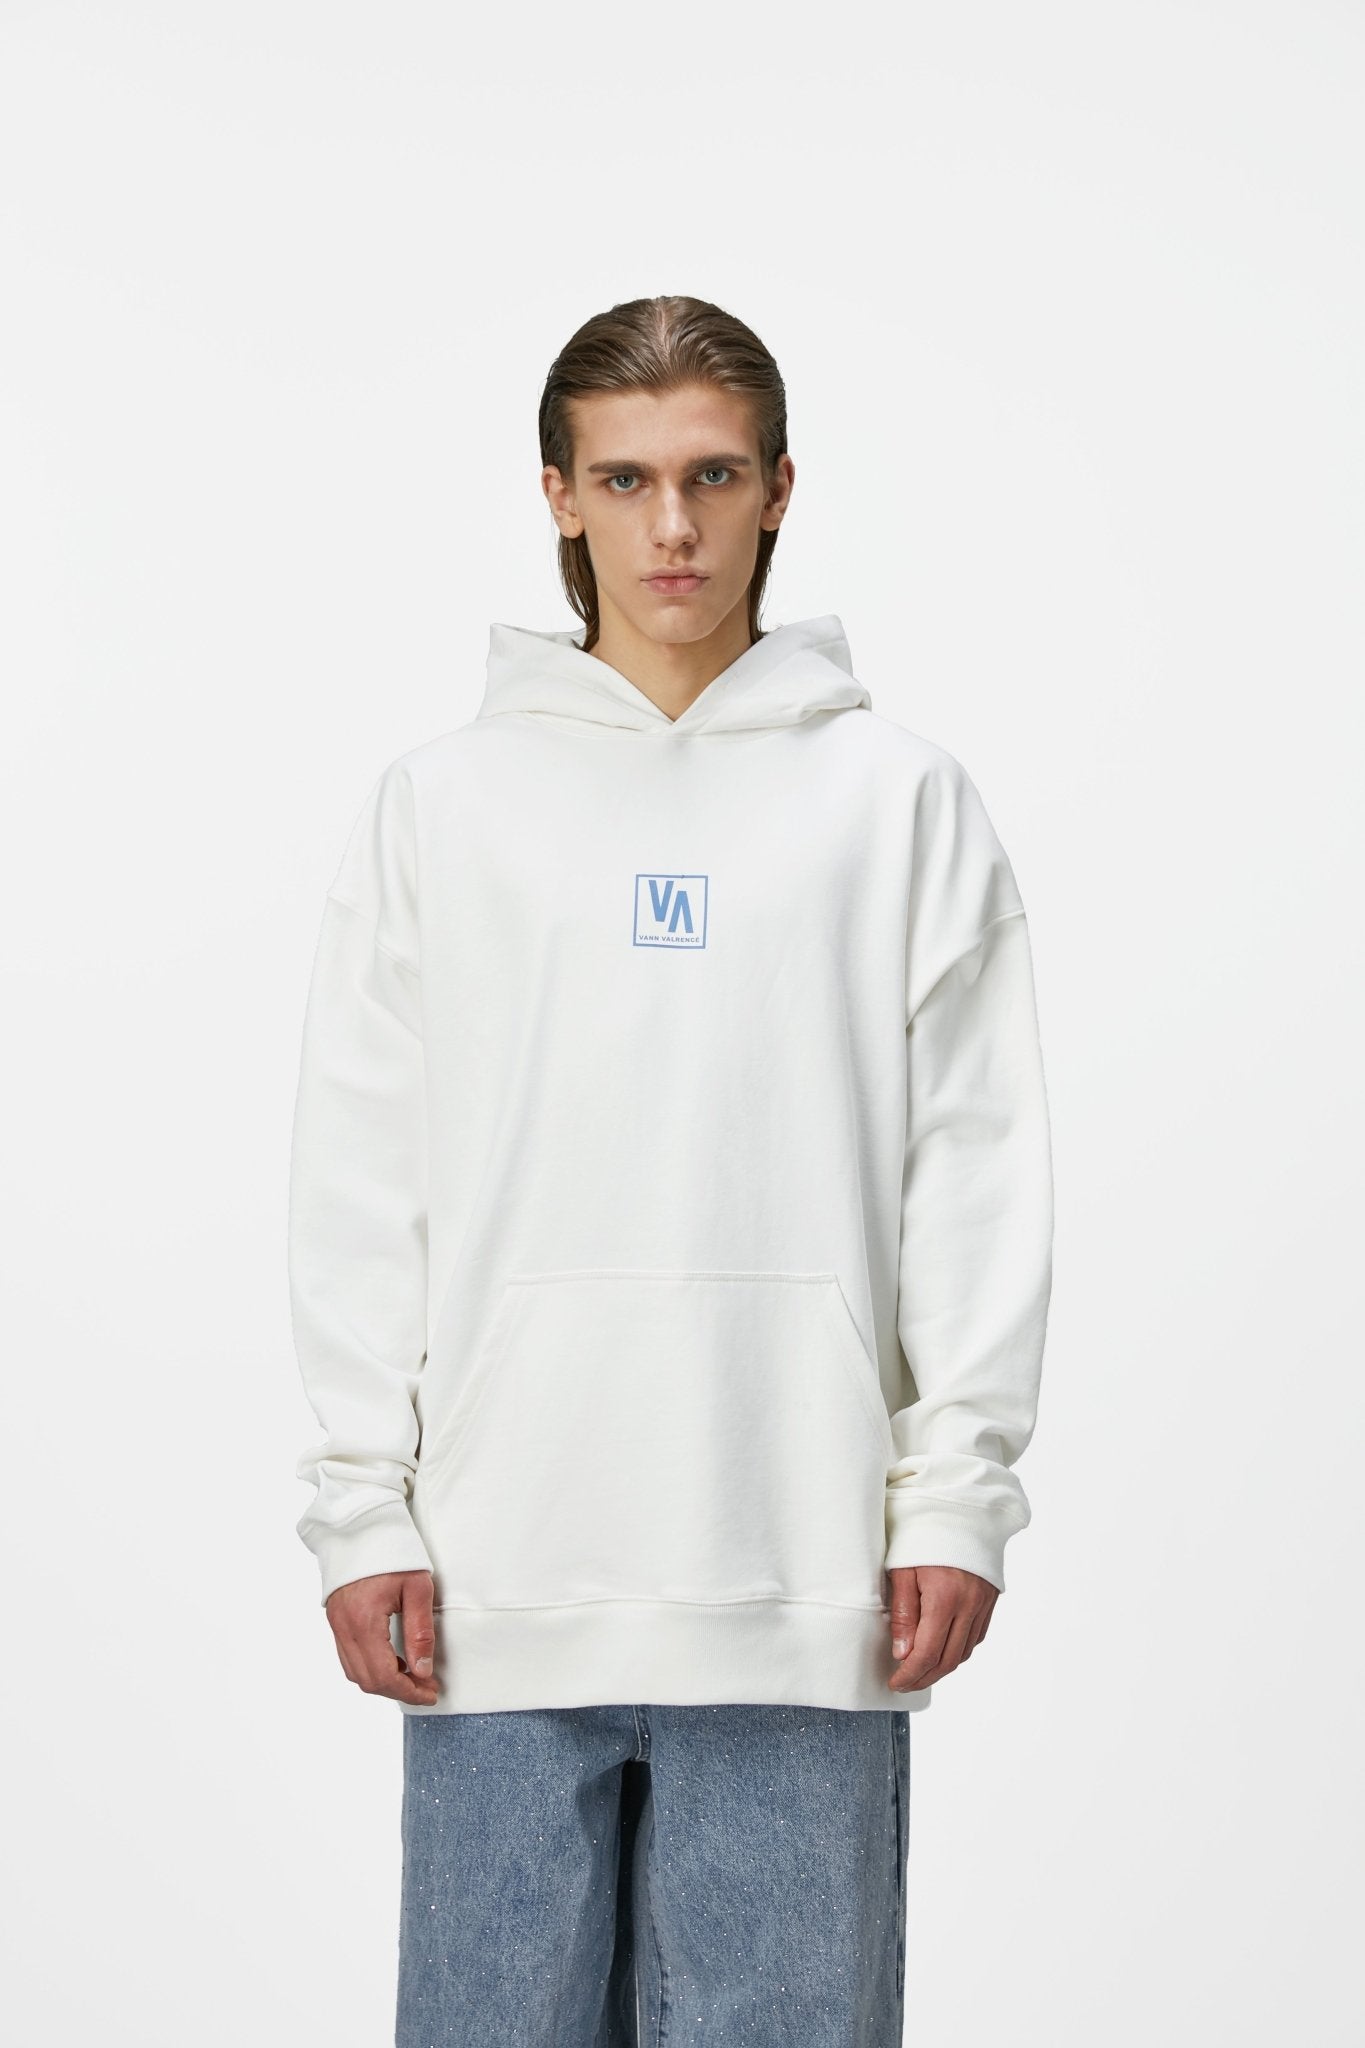 VANN VALRENCÉ White Structure Combination Hoodie | MADA IN CHINA